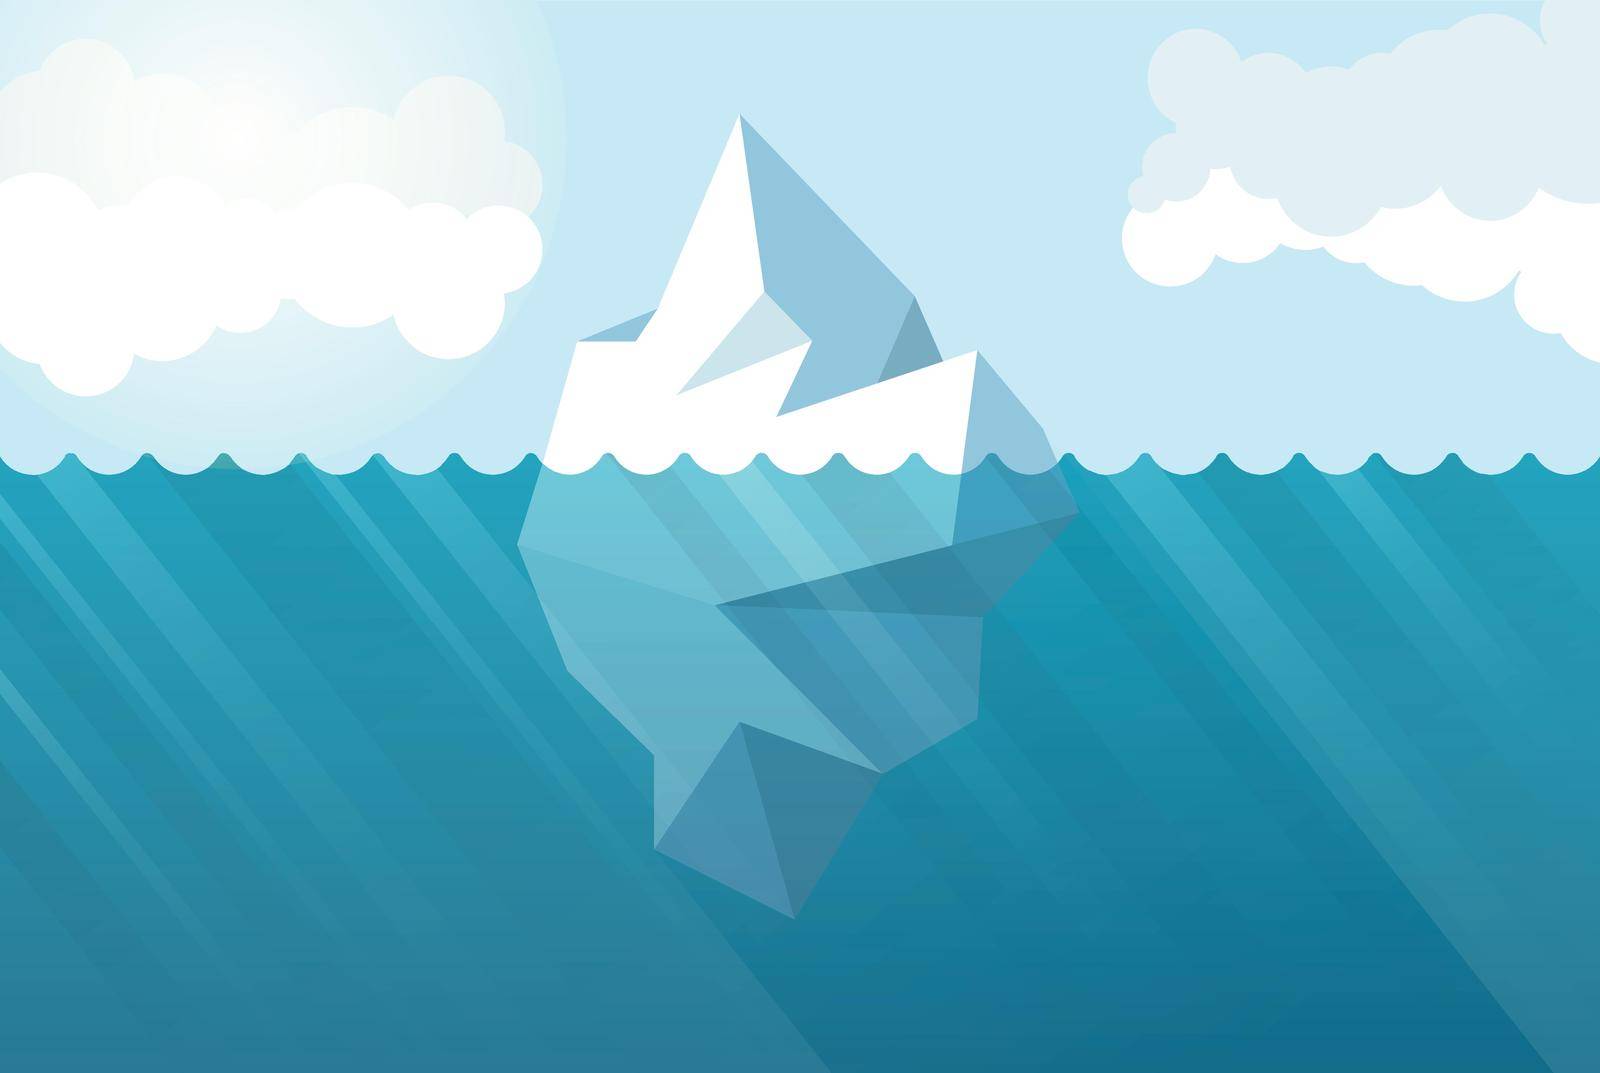 Underwater iceberg icon in flat style. Berg seascape vector illustration on isolated background. Antarctica ecology sign business concept. by LysenkoA